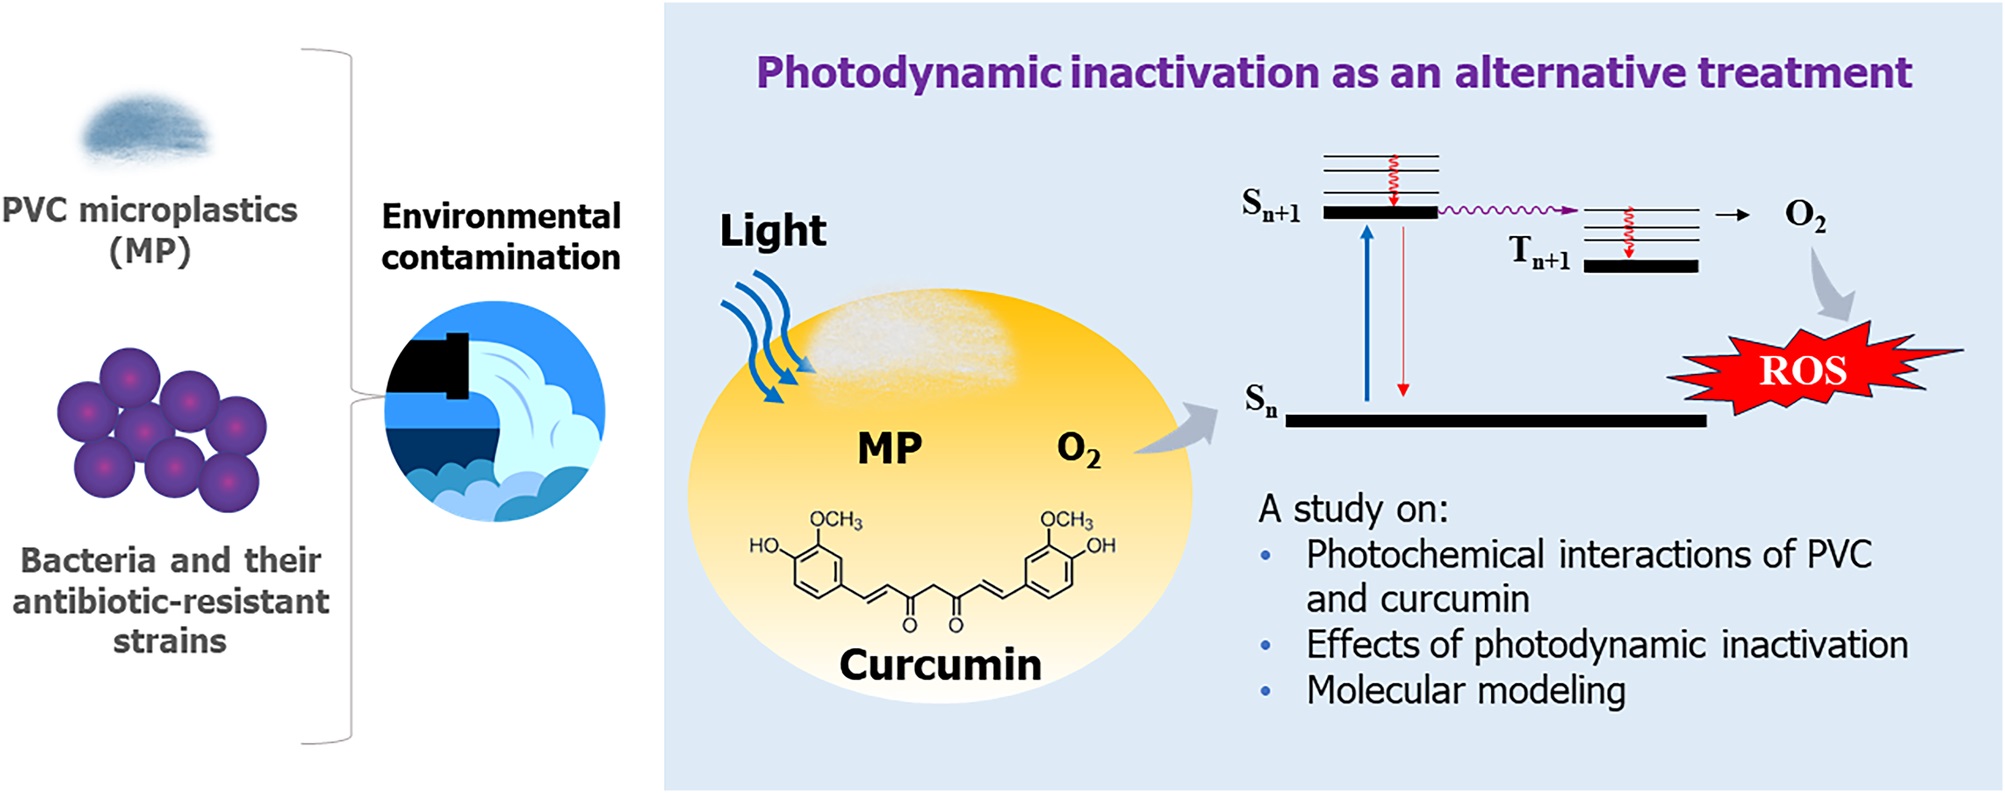 Impact of PVC microplastics in photodynamic inactivation of Staphylococcus aureus and MRSA.